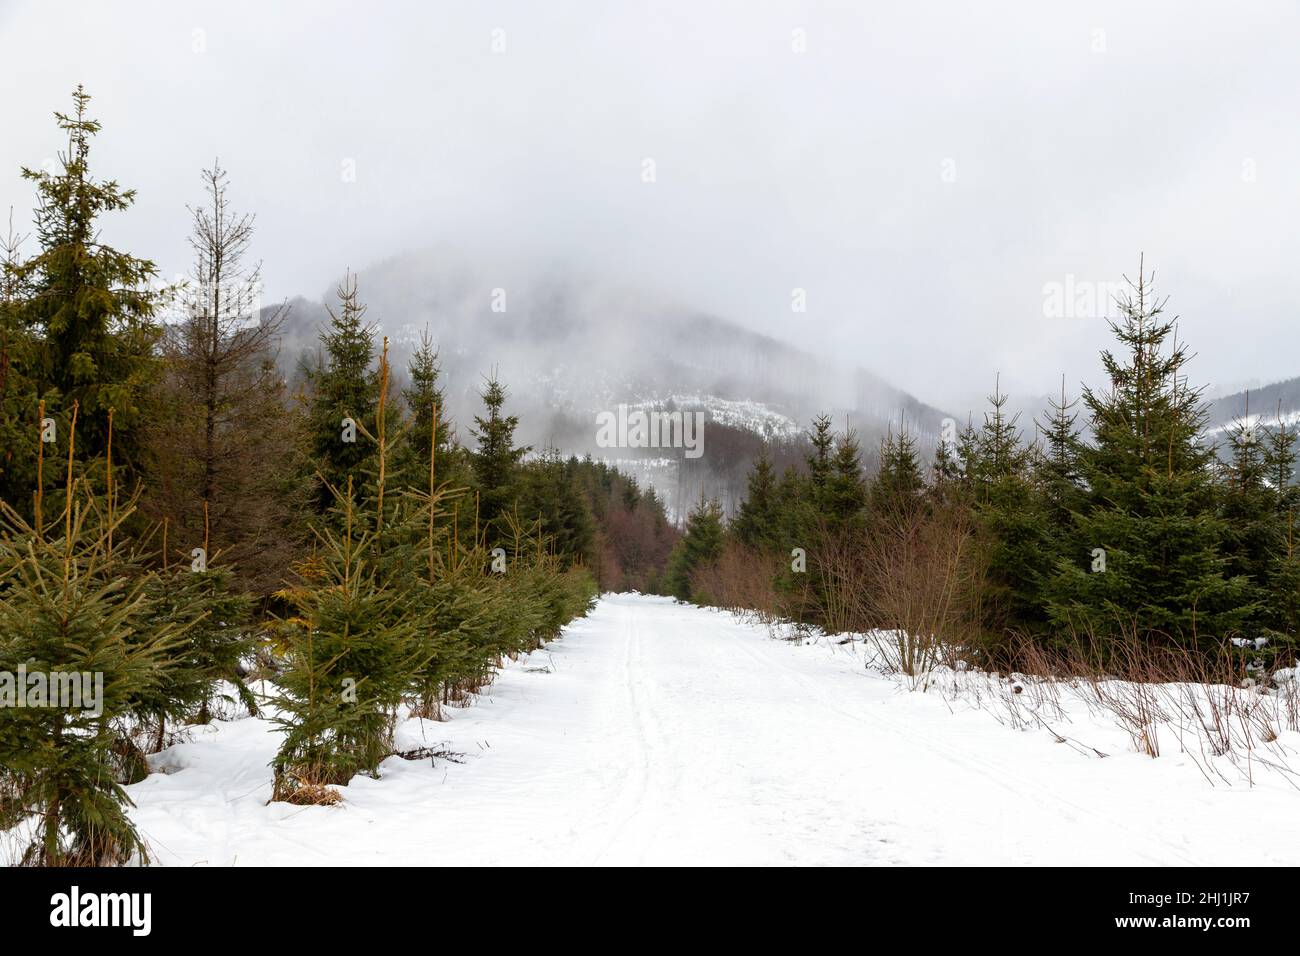 Schmallenberg Winter High Resolution Stock Photography and Images - Alamy